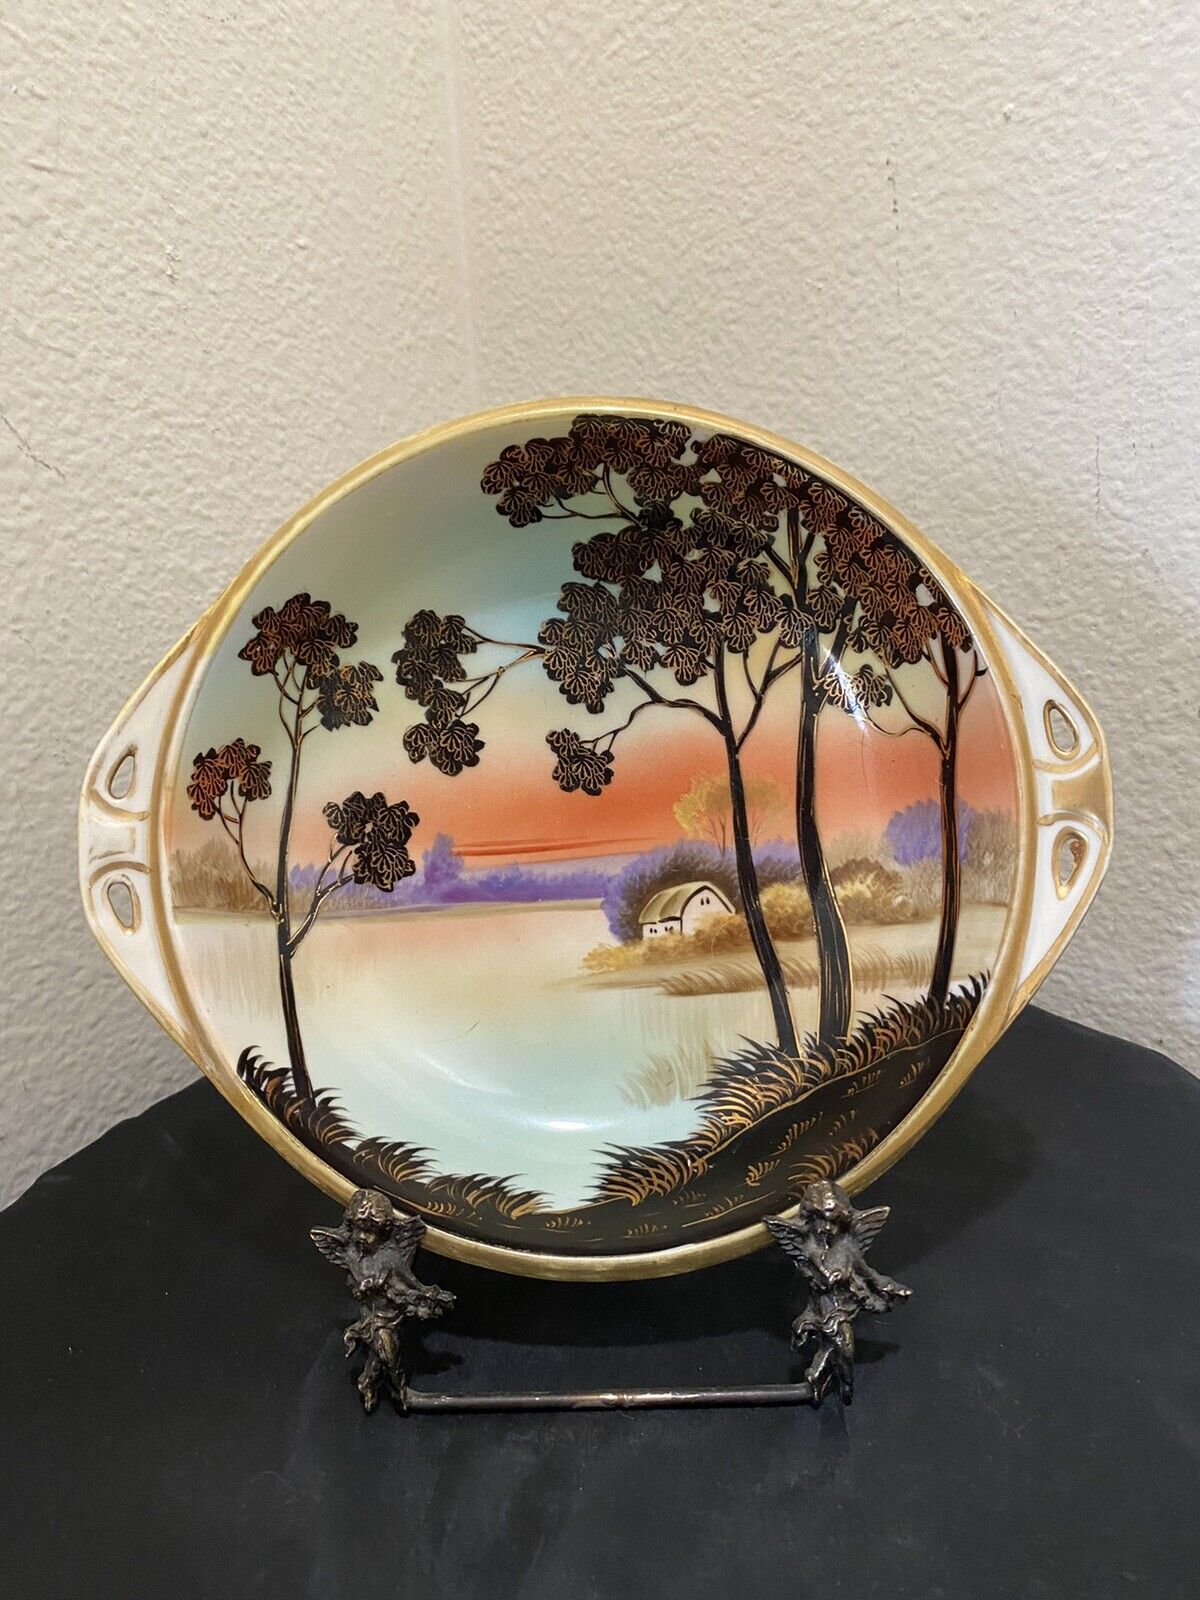 Nippon Morimura Bowl Hand Painted Gold Gilt Handles Landscape Water Trees 8”